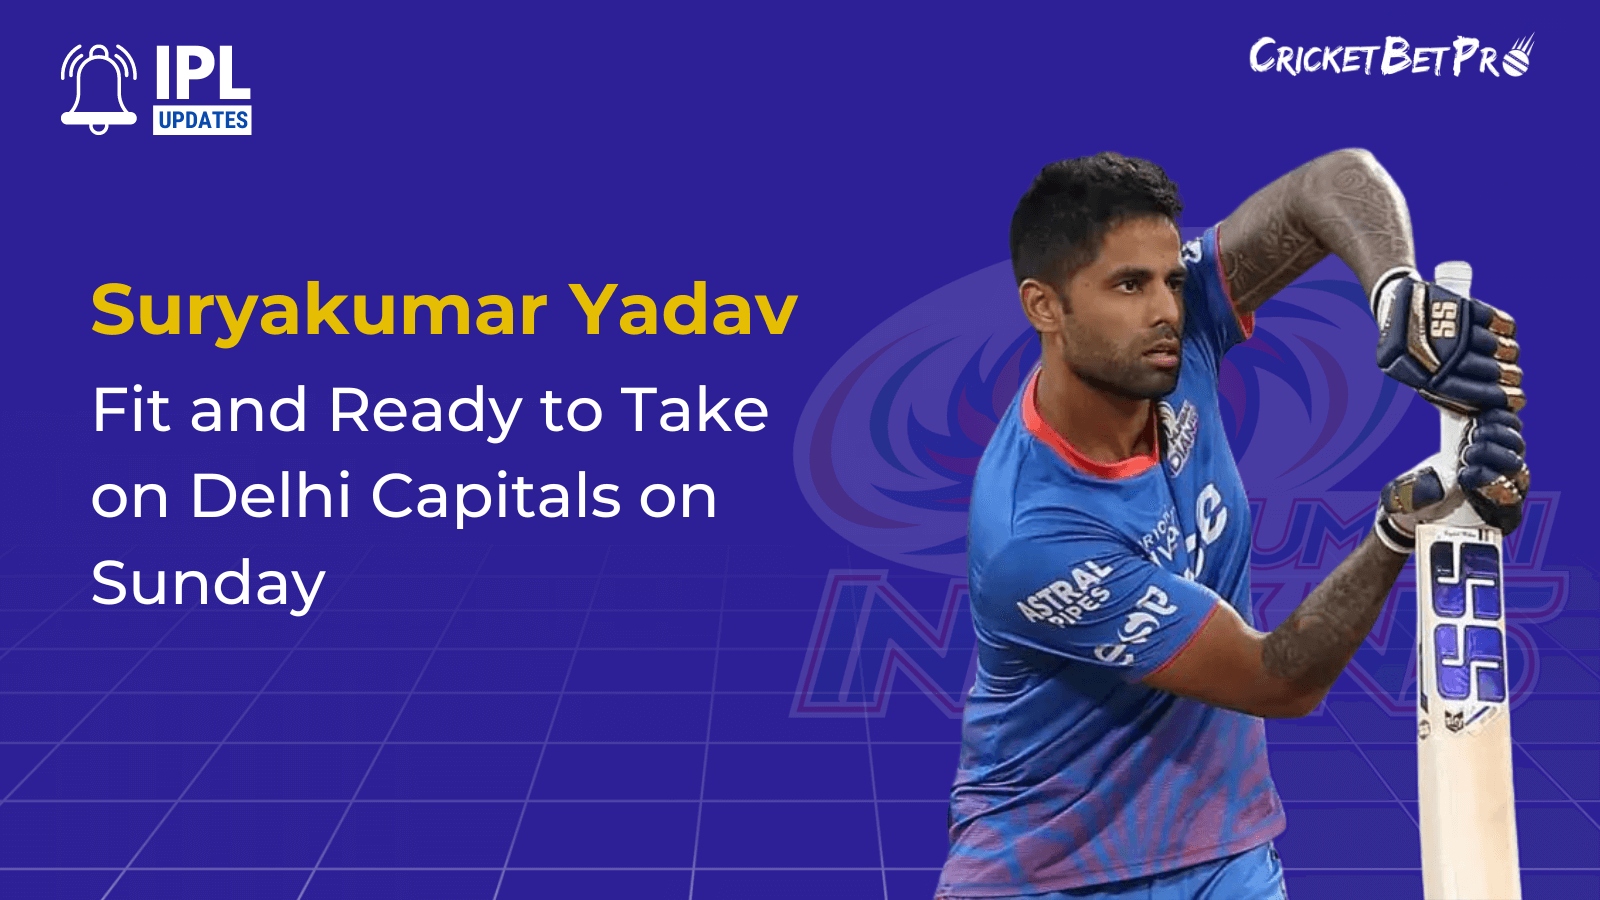 Suryakumar Yadav Fit and Ready to Take on Delhi Capitals on Sunday